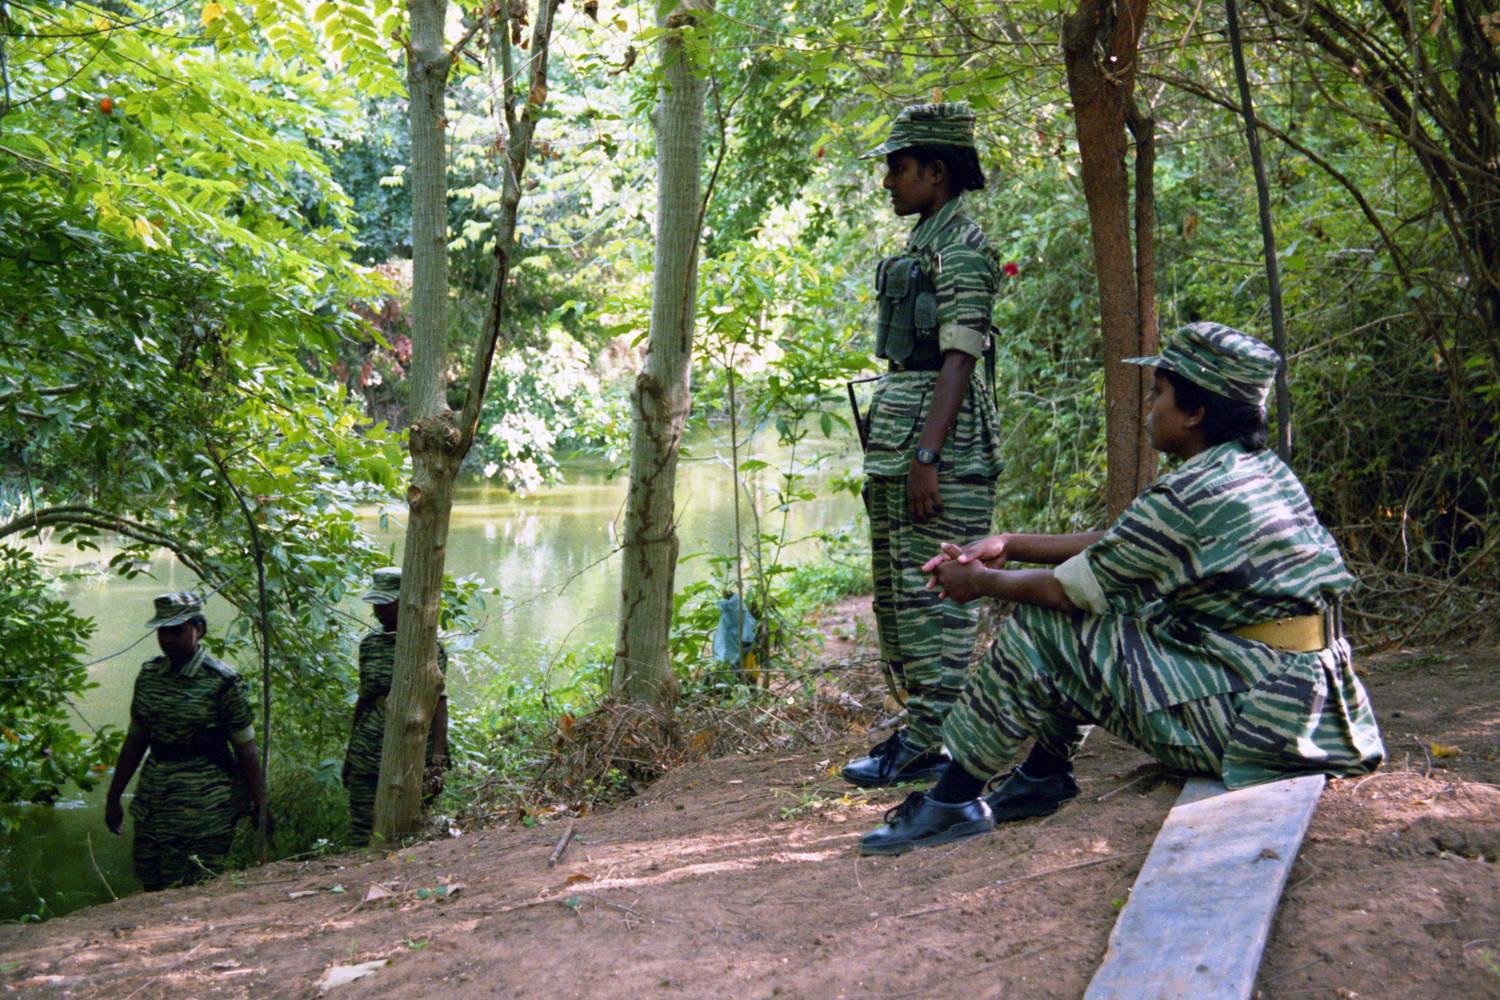 Women of the Liberation Tigers of Tamil Eelam. CC-BY Salix Oculus via Wikimedia Commons